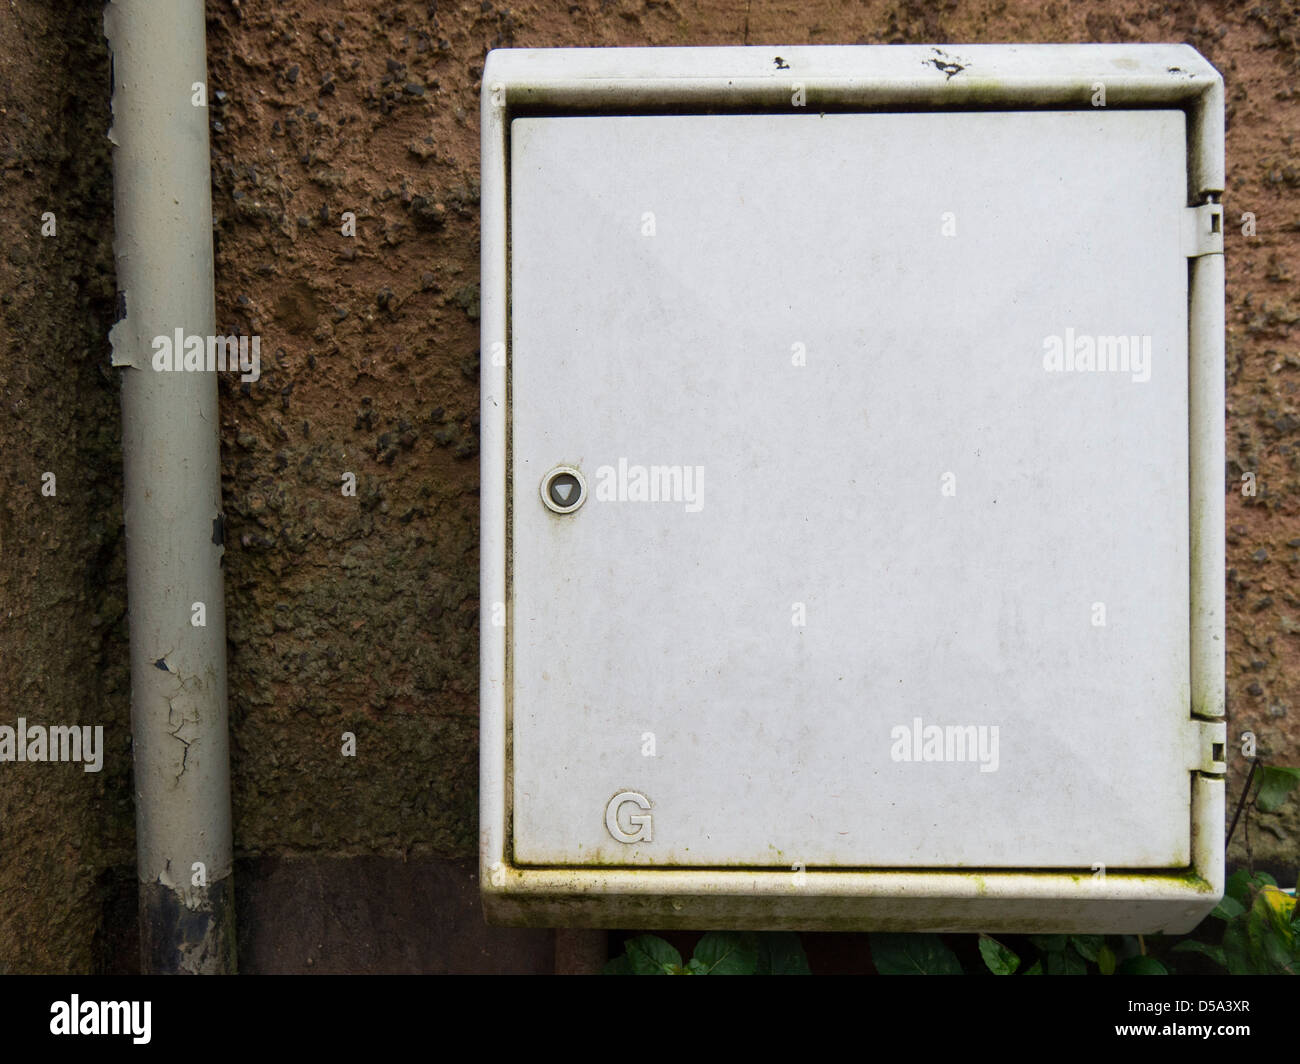 Gas meter box on house exterior. Stock Photo